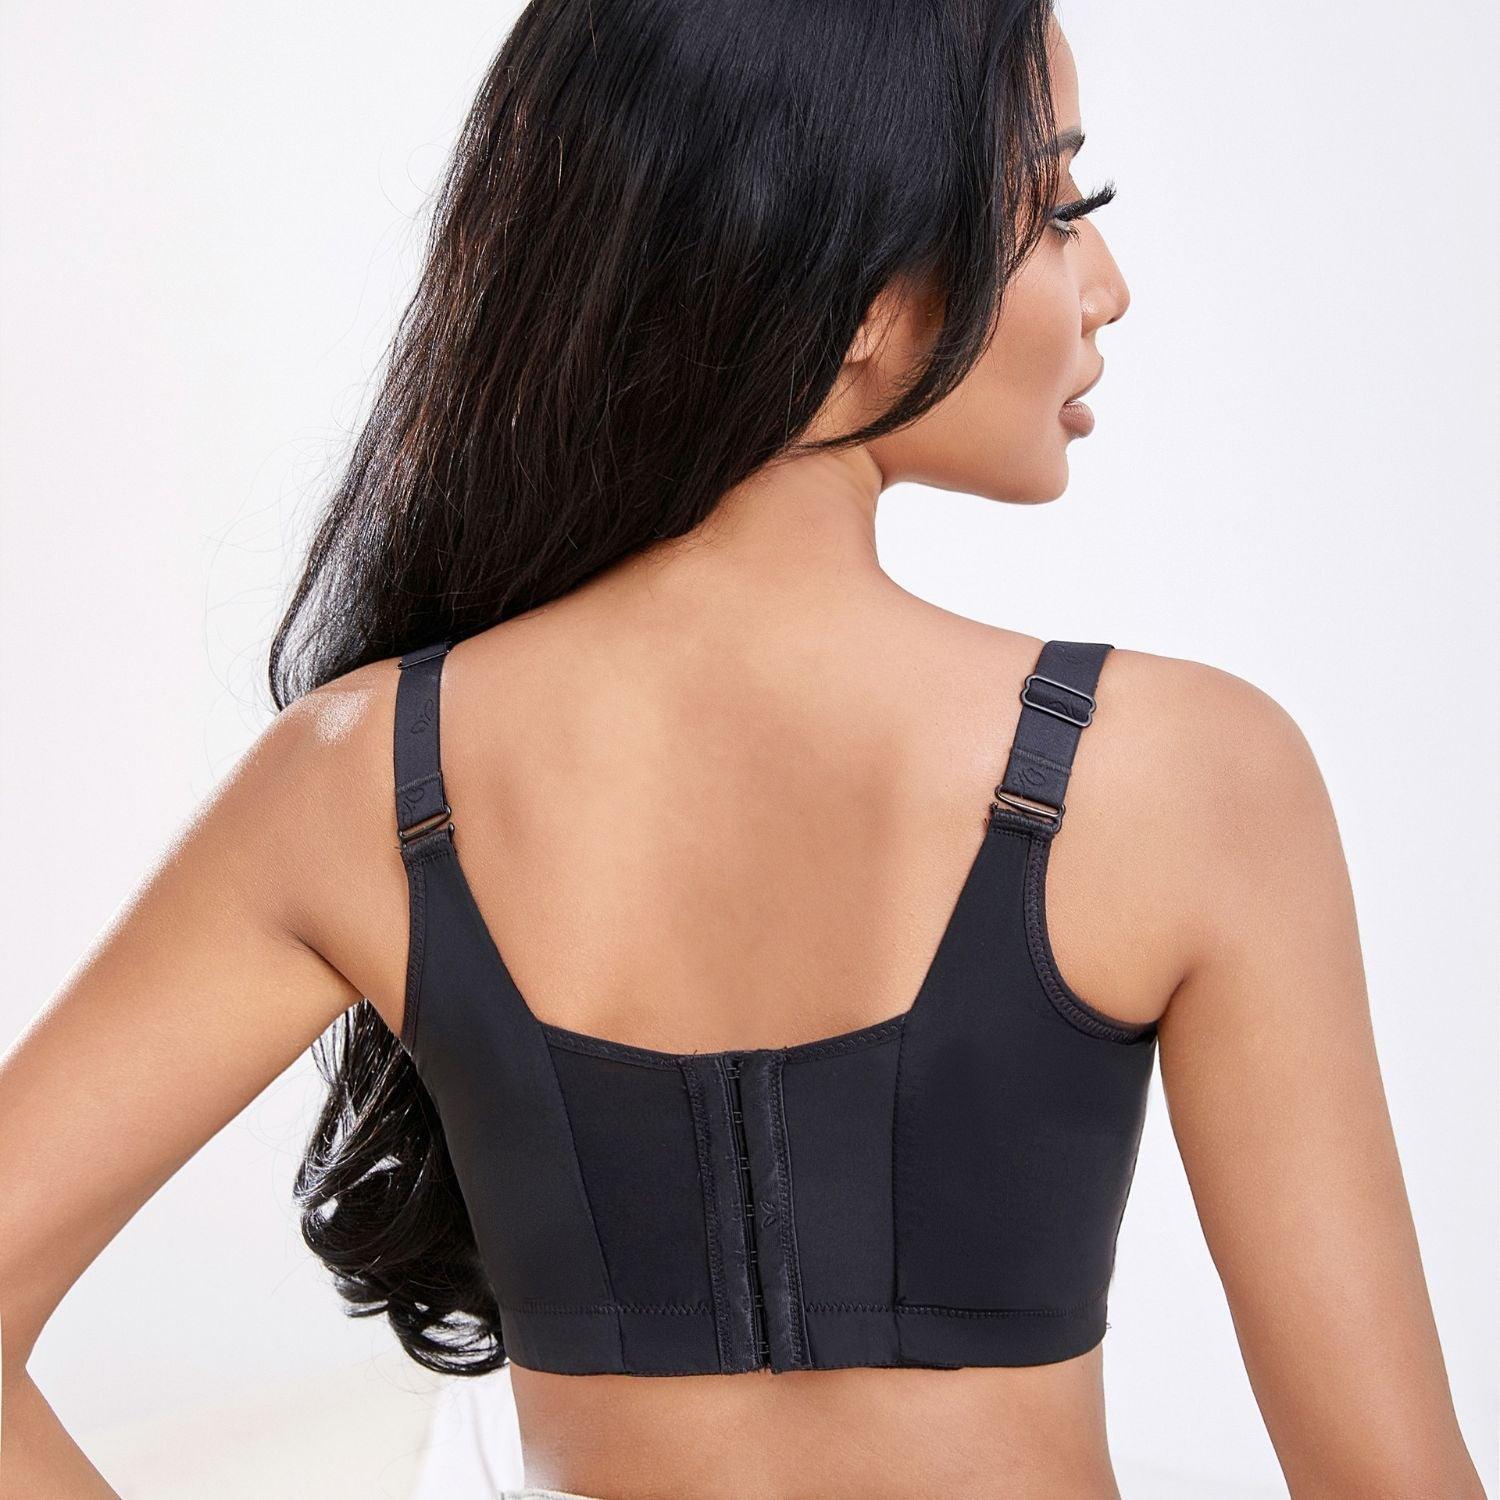 Our new bra works magic with that stubborn back fat ❤️ Smooth